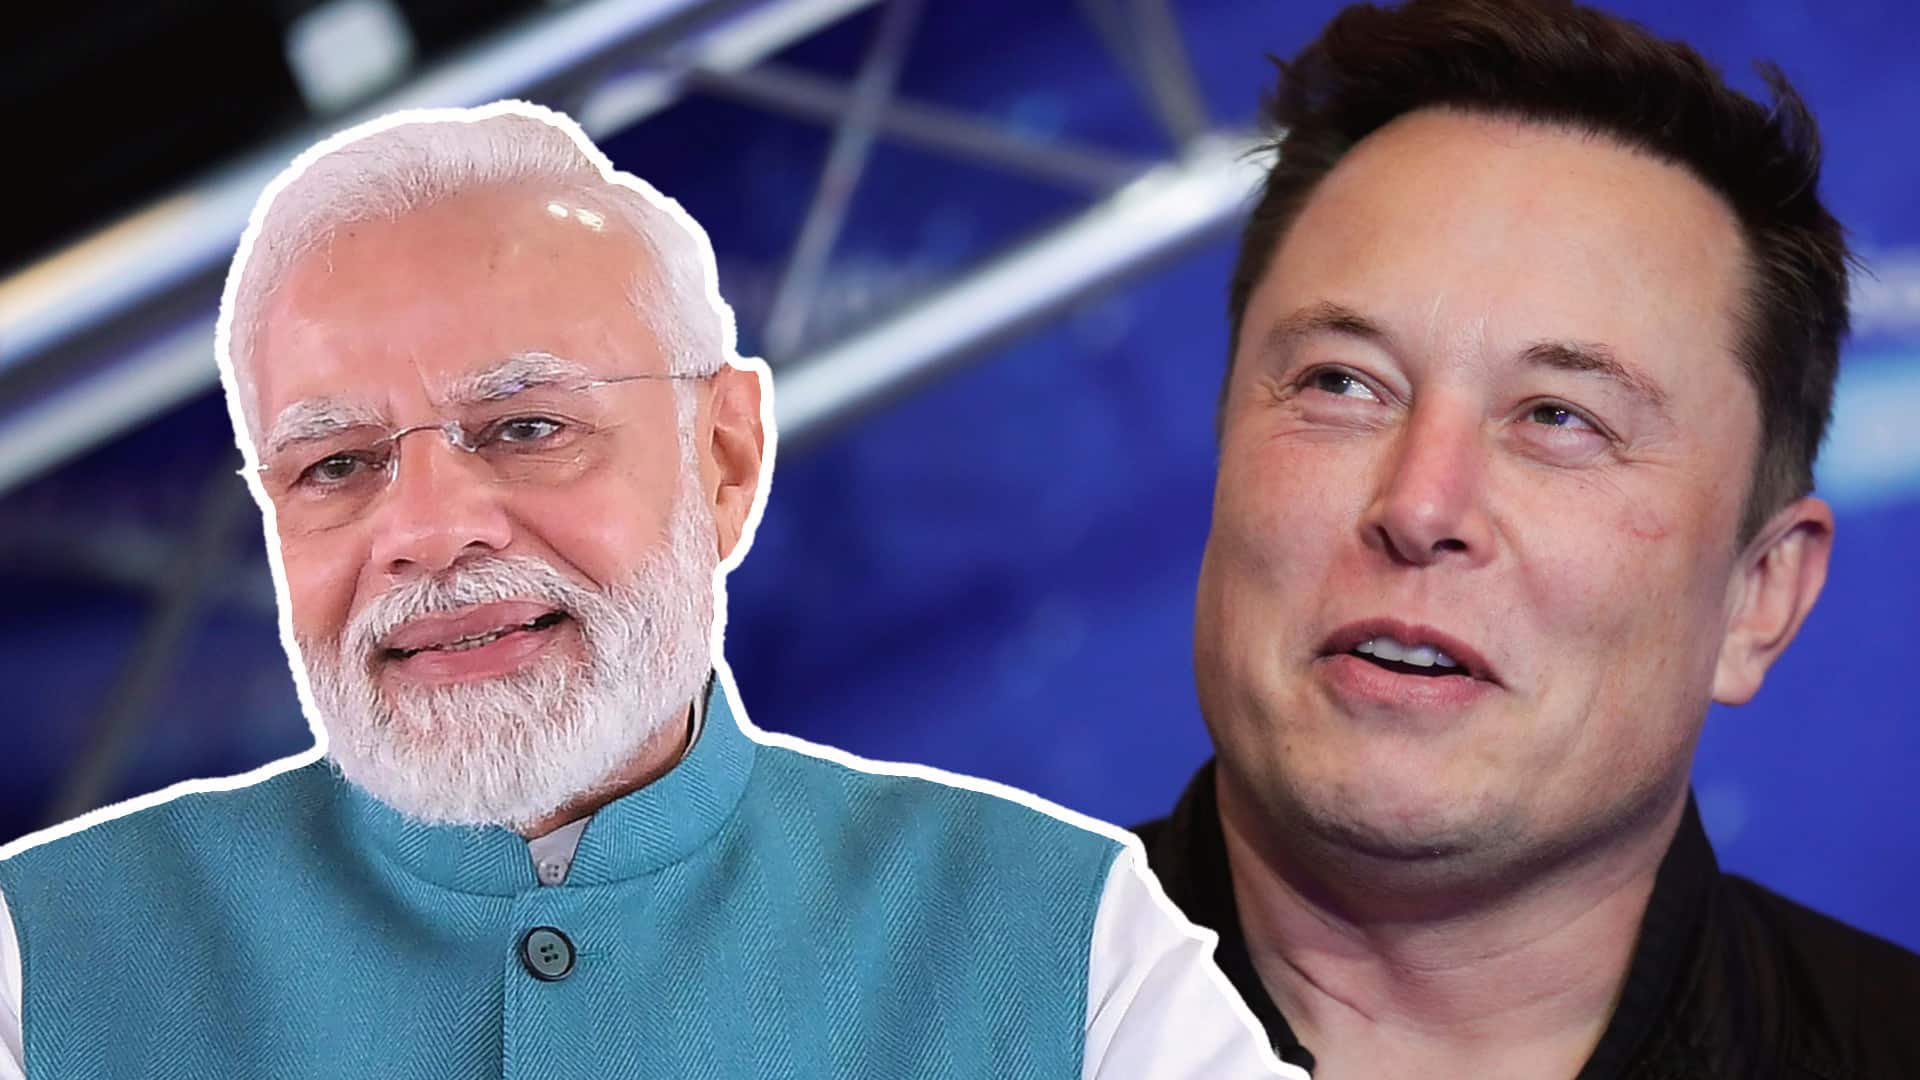 Elon Musk To Visit India- Man on Many Missions